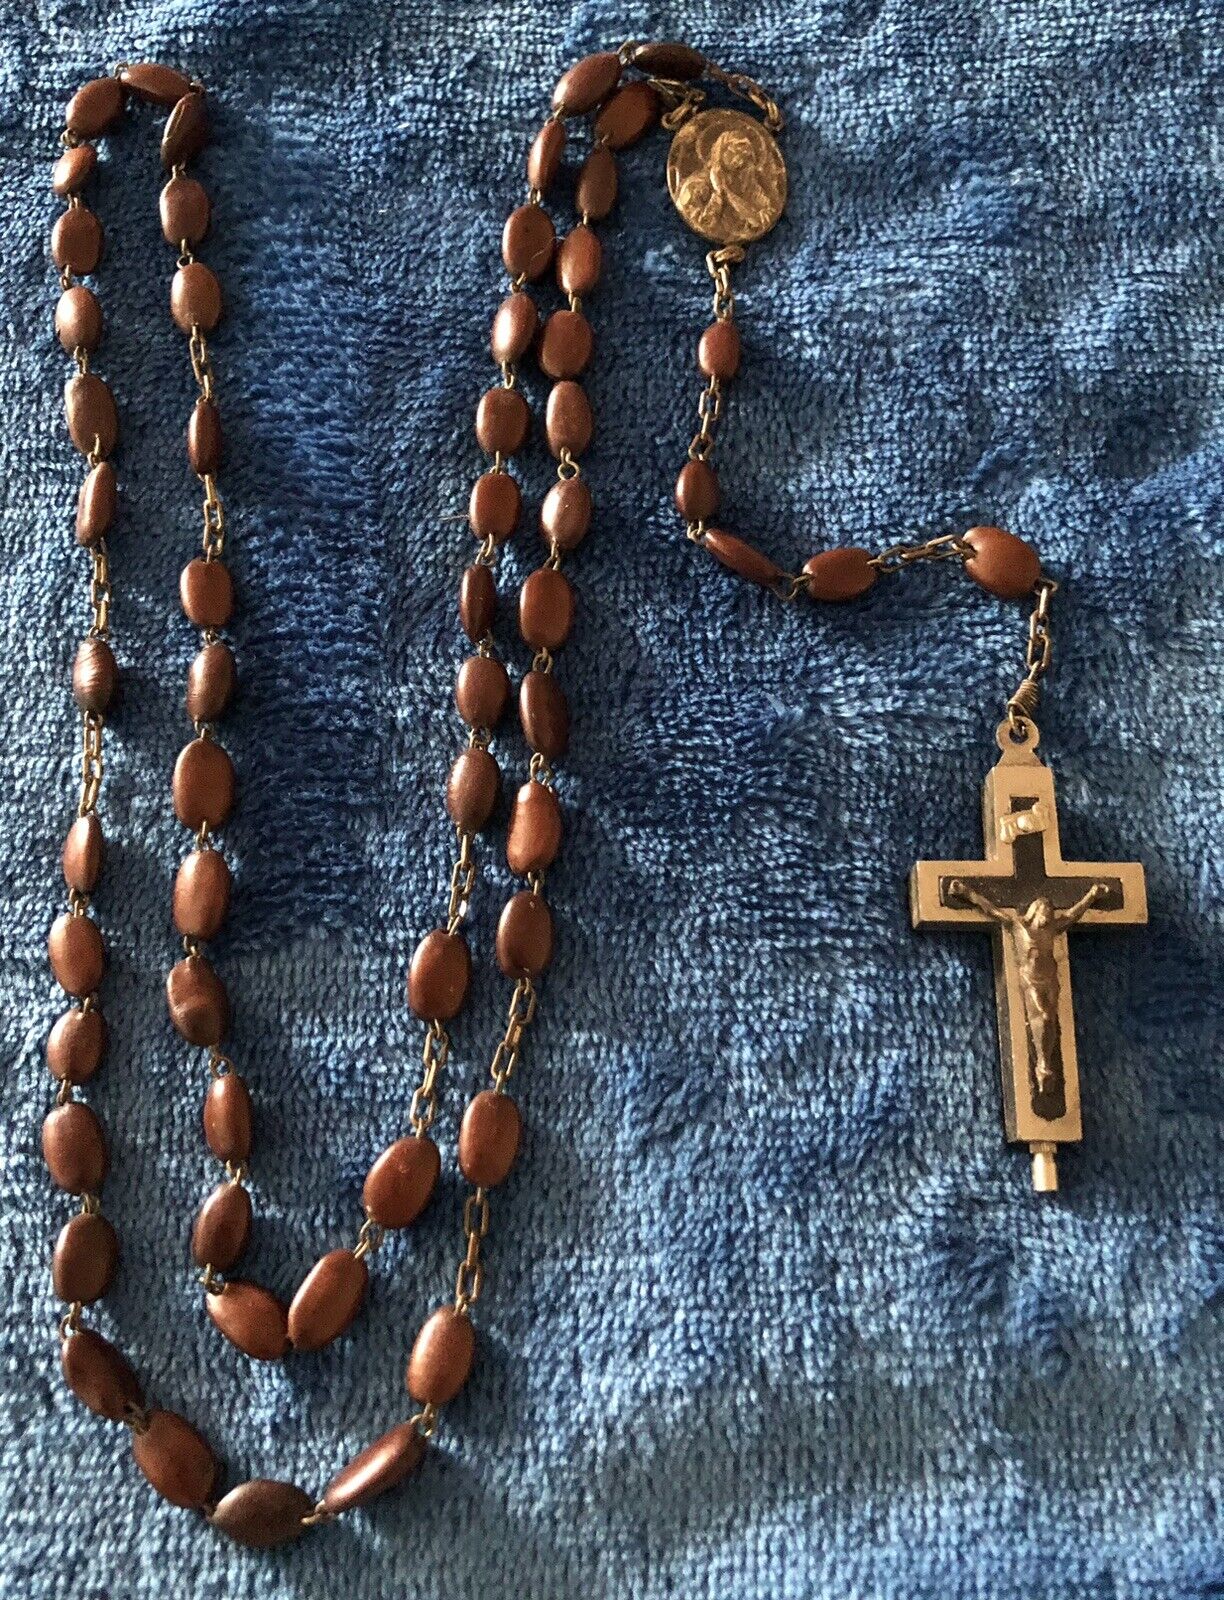 Reliquary Rosary With Spina Cristi Seed Beads  Crucifix From Italy. 21” Long